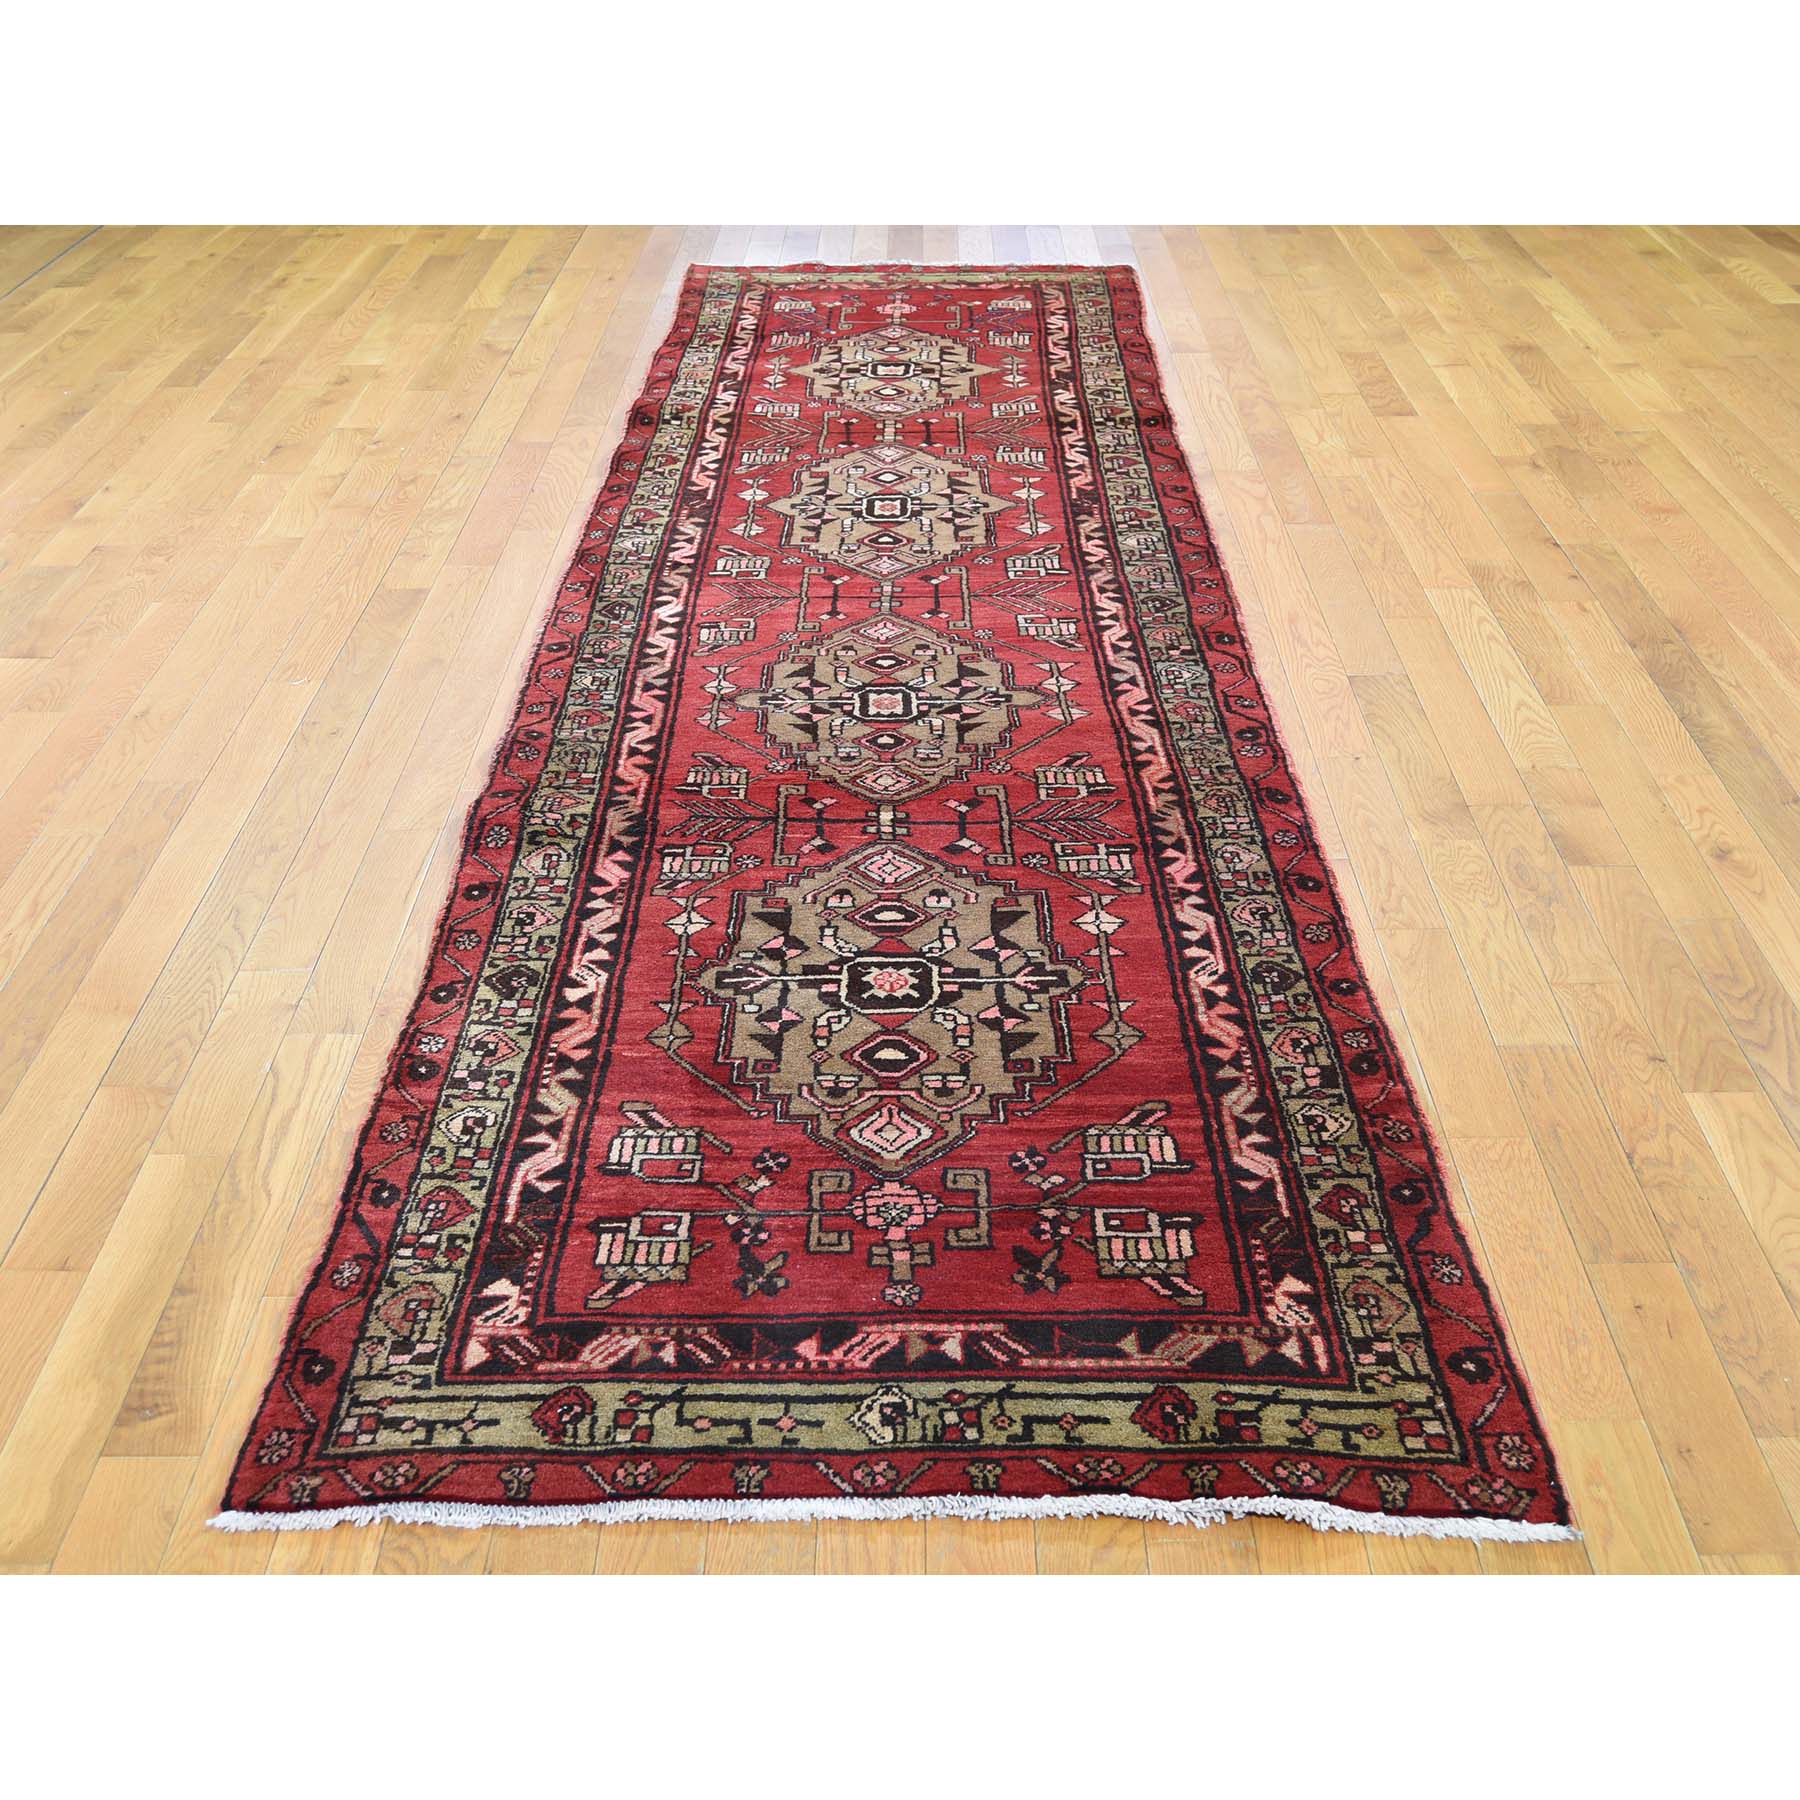 3-4 x13- Red Vintage North West Persian Bohemian Runner Pure Wool Hand-Knotted Oriental Rug 